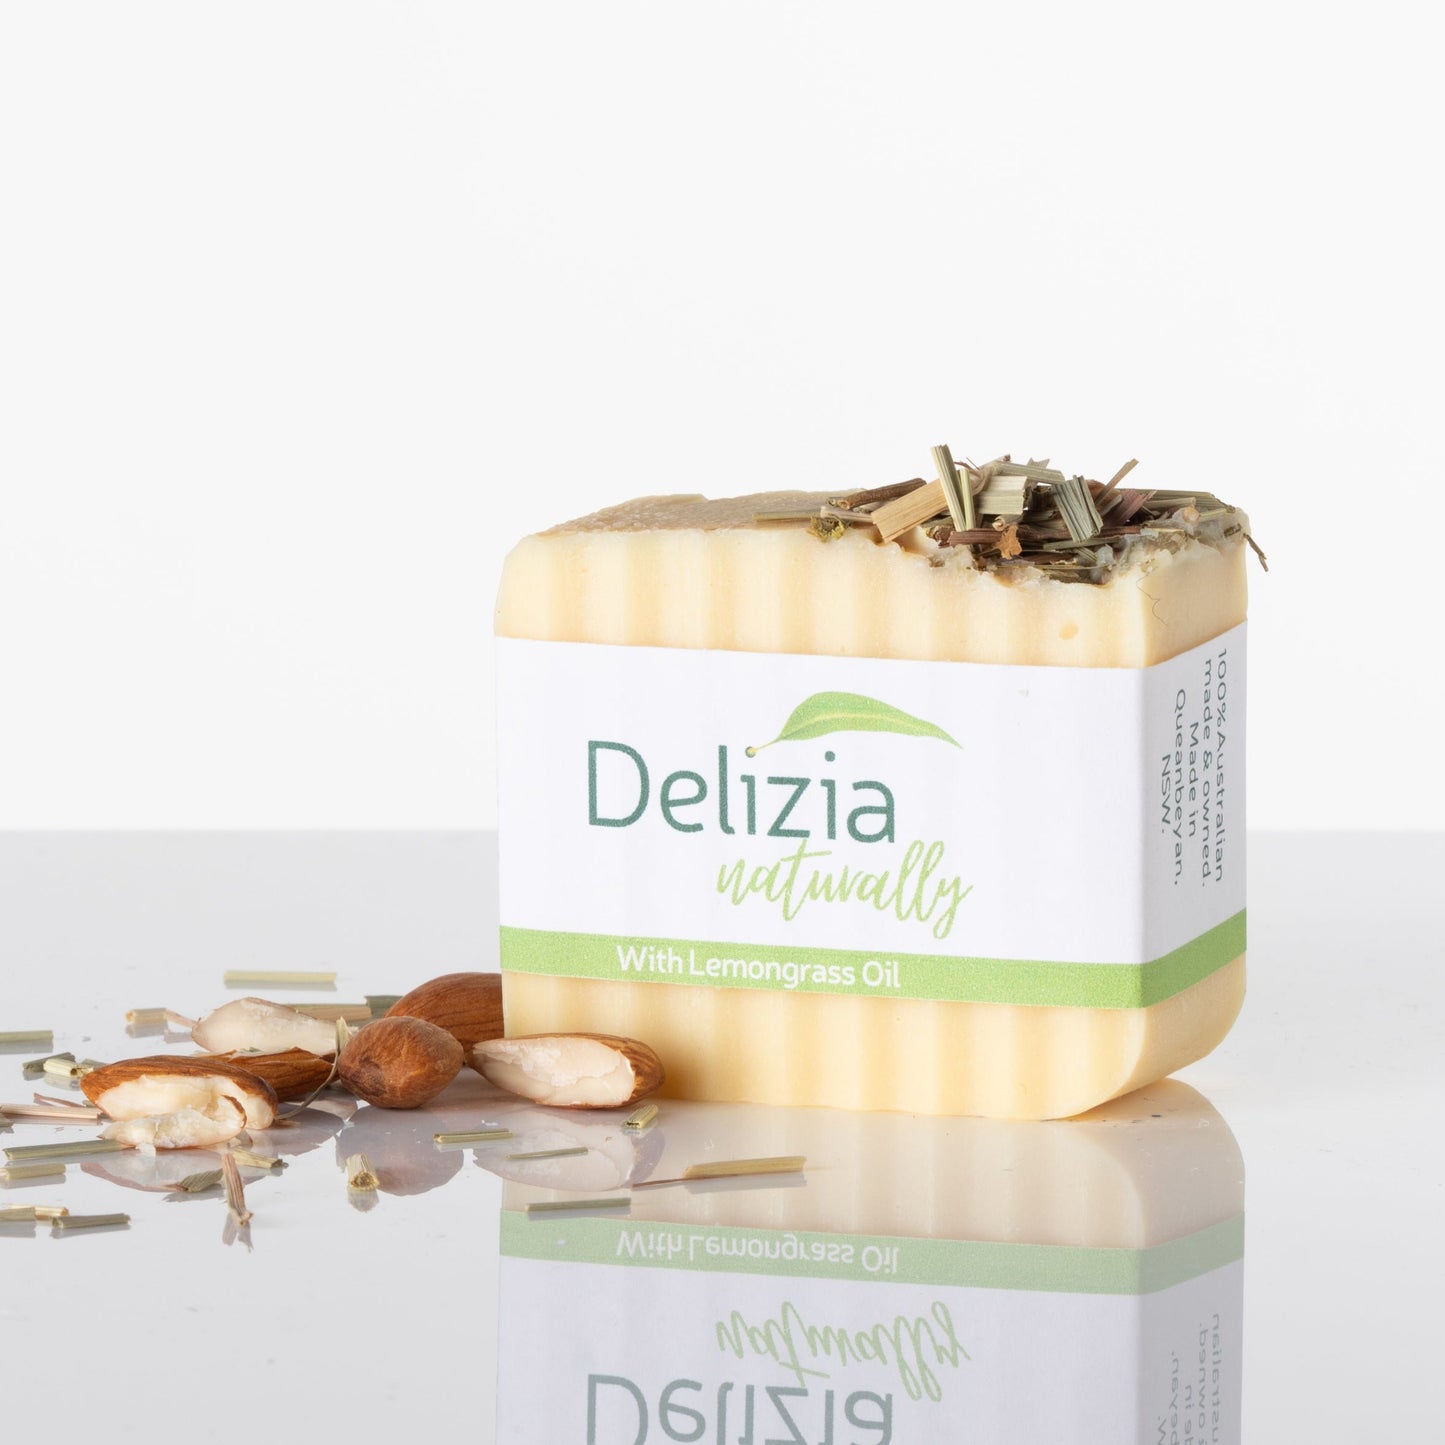 Shampoo Bar from Delizia Naturally with Lemongrass only